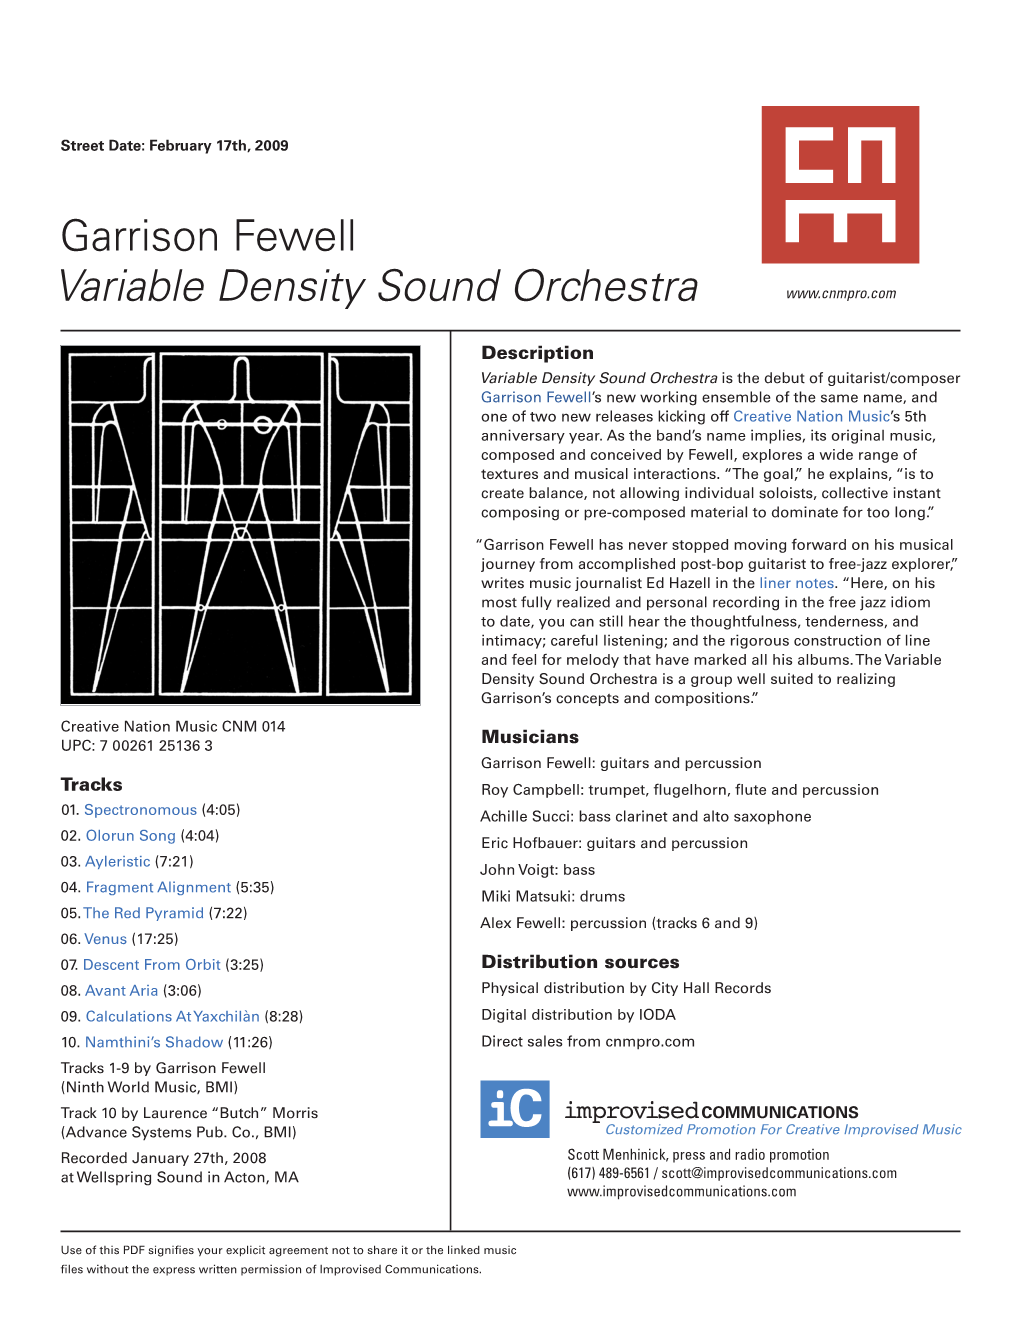 Garrison Fewell Variable Density Sound Orchestra